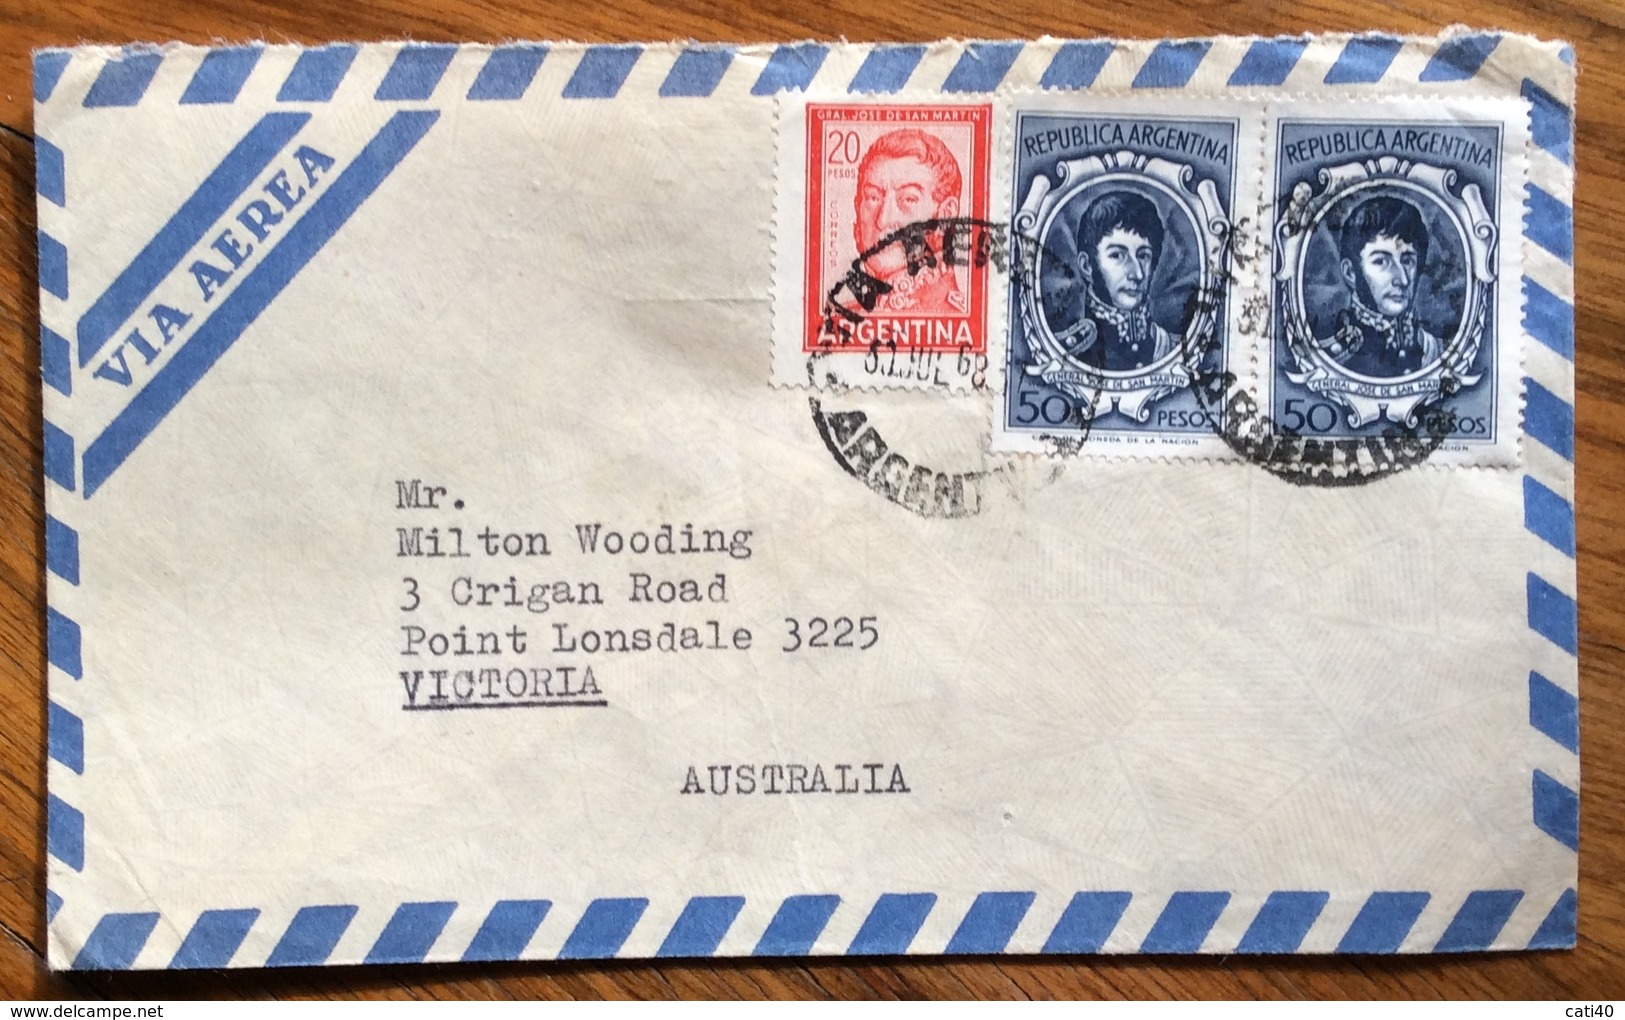 ARGENTINA ENVELOPE  PAR AVION    FROM BUENOS AIRES TO VICTORIA AUSTRALIA THE 31/7/68 - Buenos Aires (1858-1864)